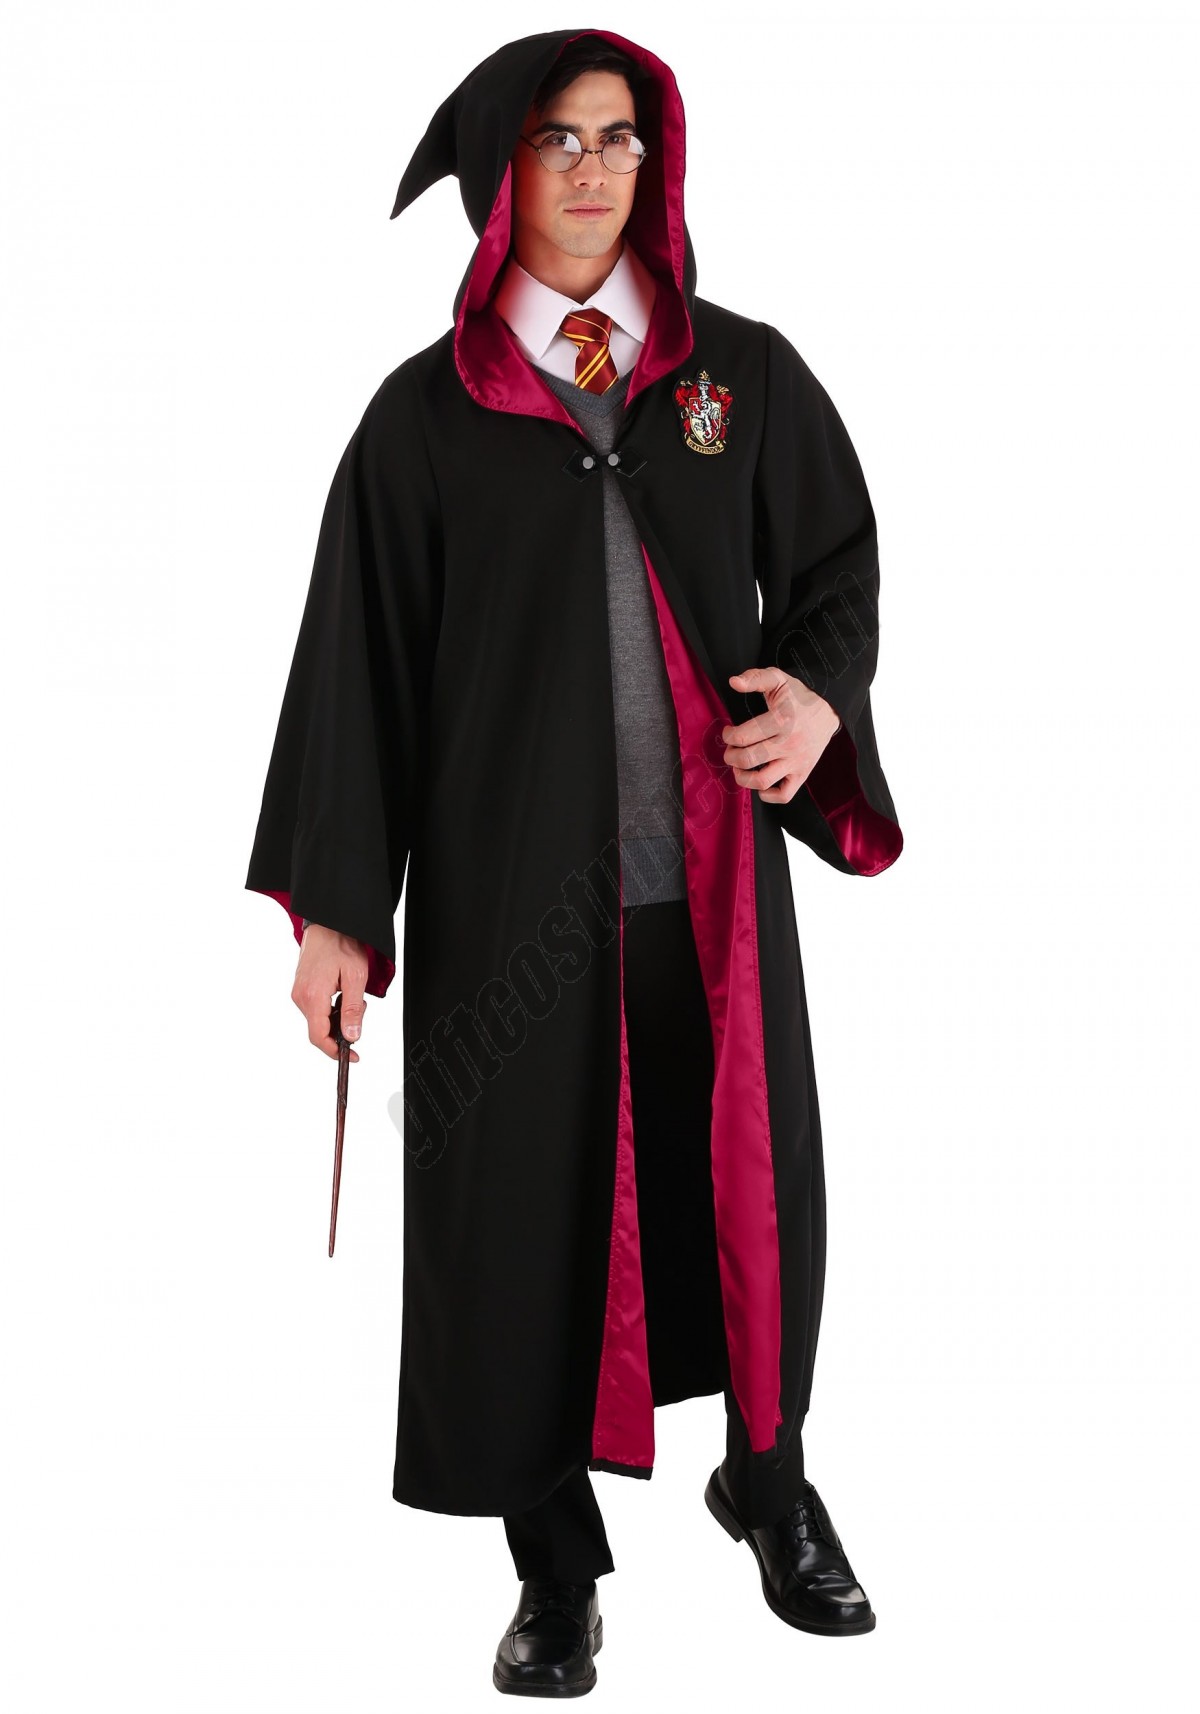 Deluxe Harry Potter Costume for Adults Promotions - -2